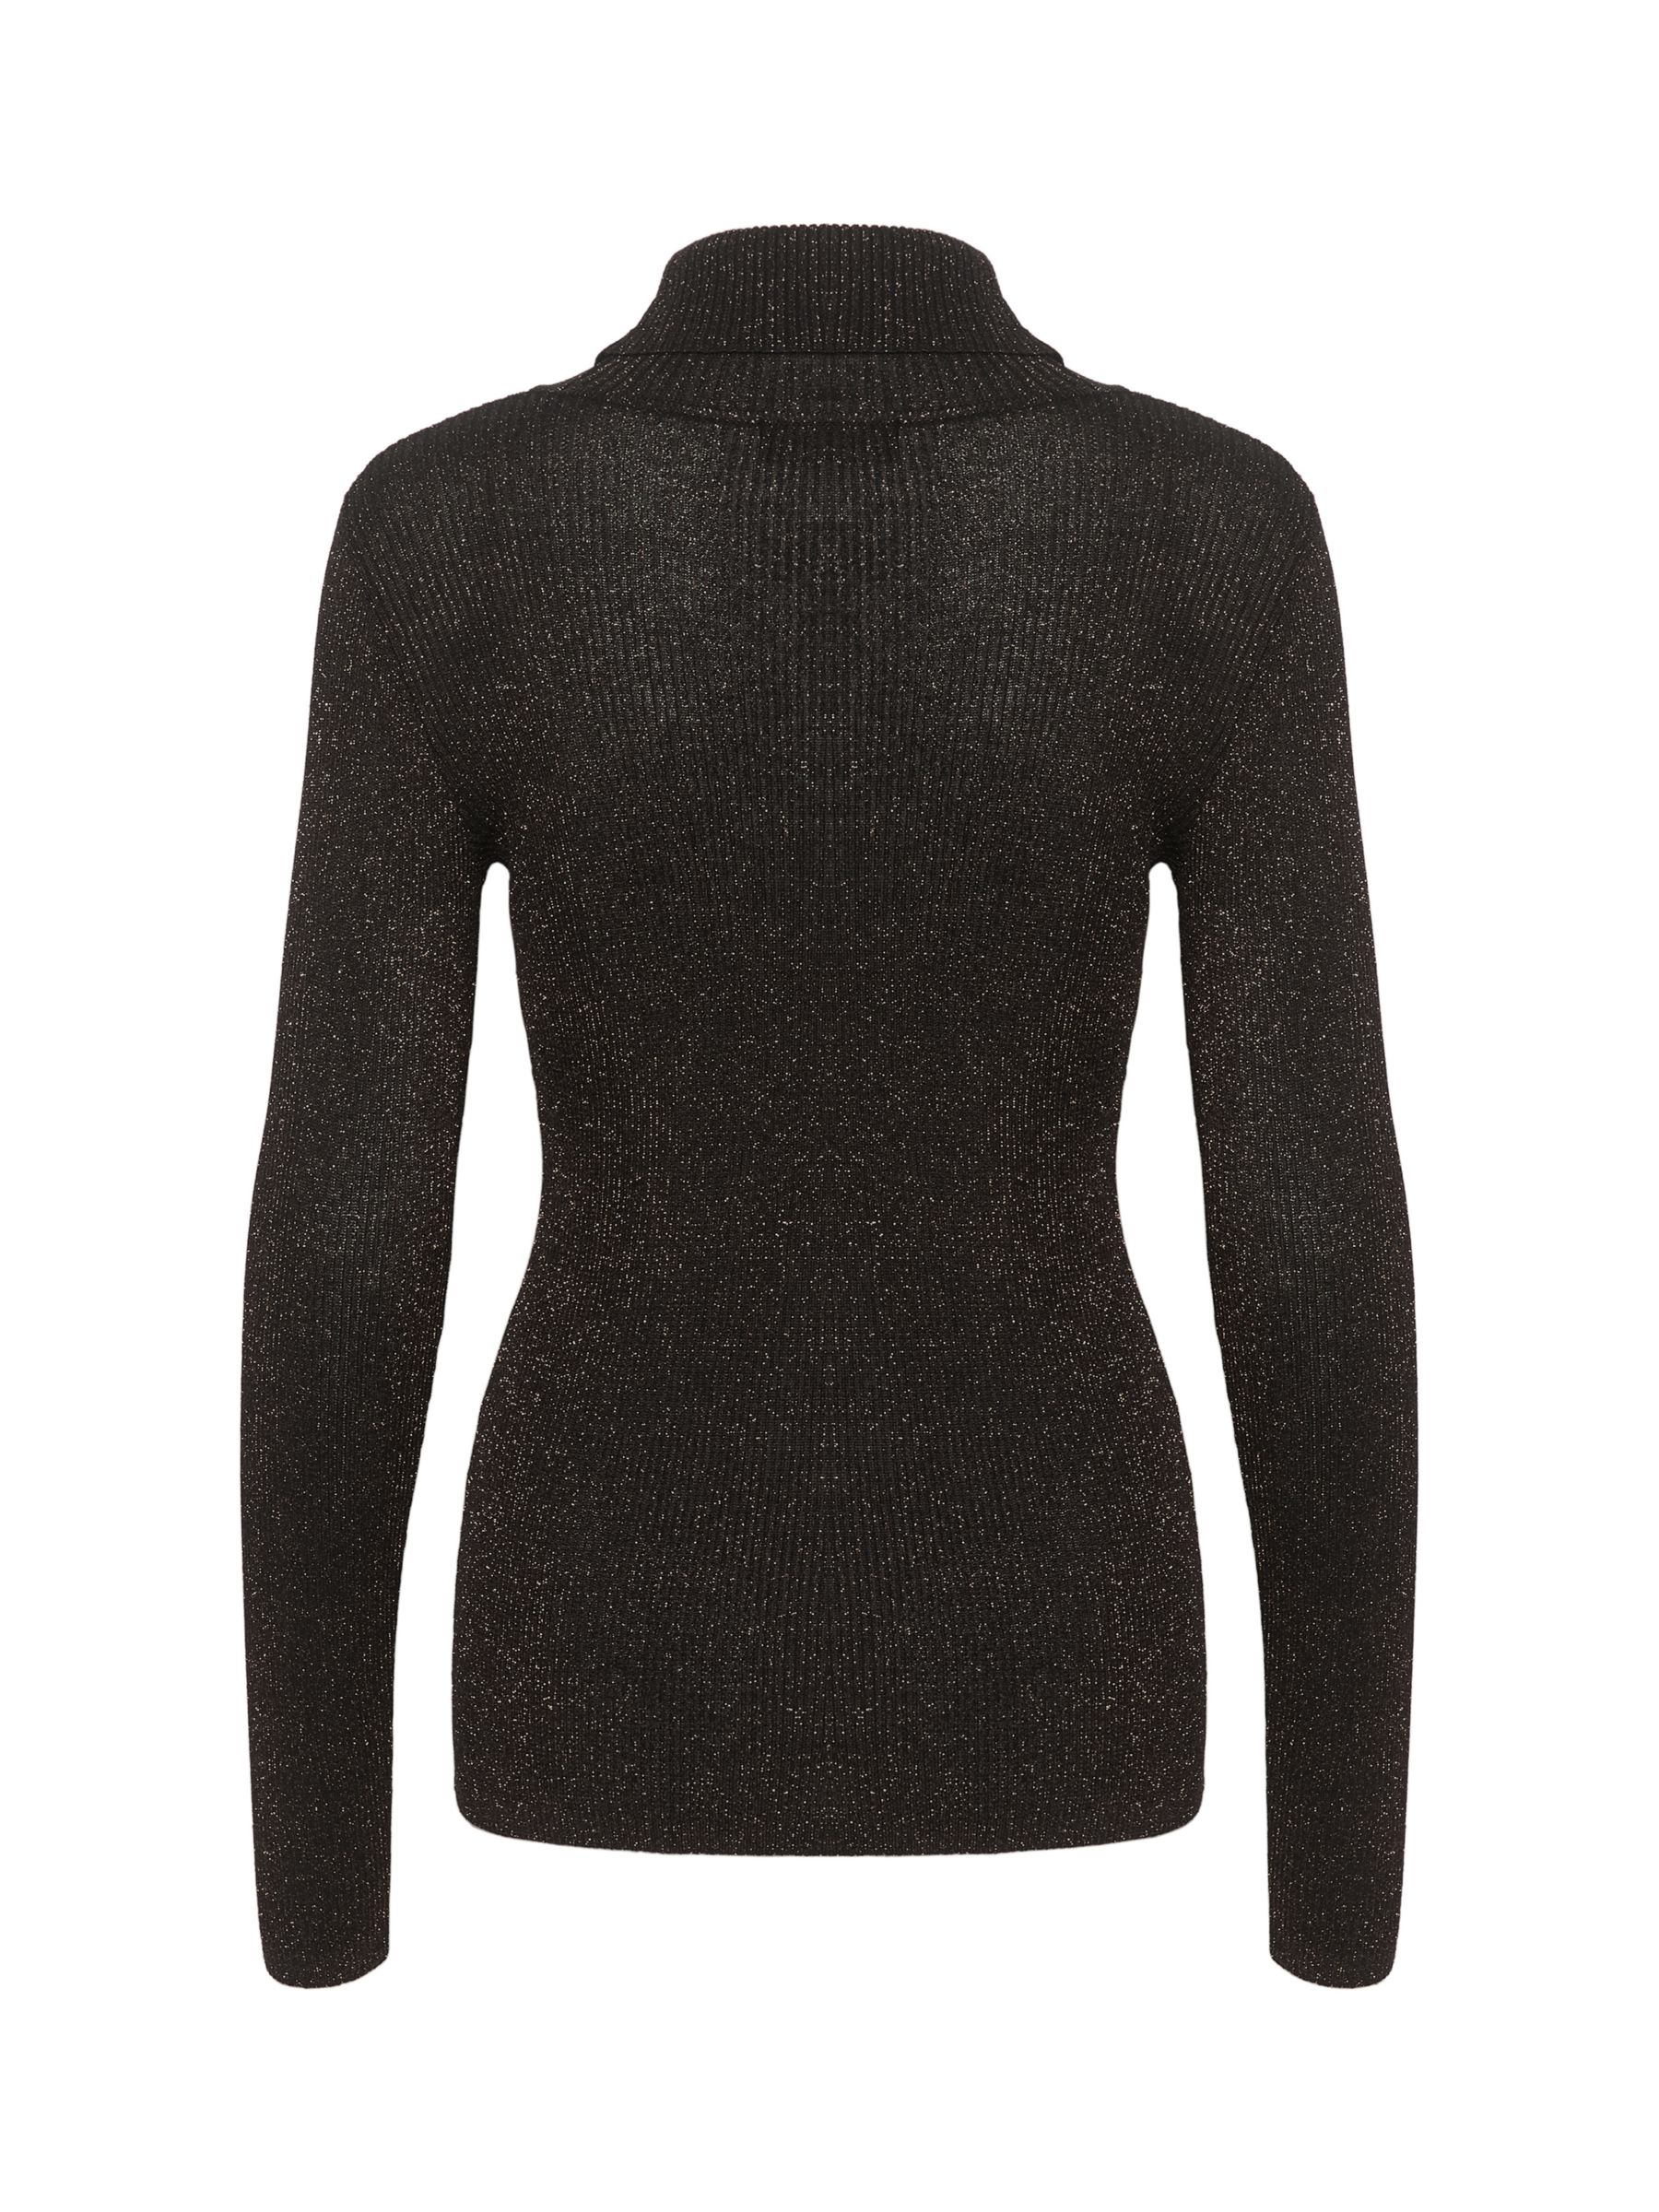 Buy Soaked In Luxury Carina Metallic Knit Slim Fit Pullover Jumper Online at johnlewis.com